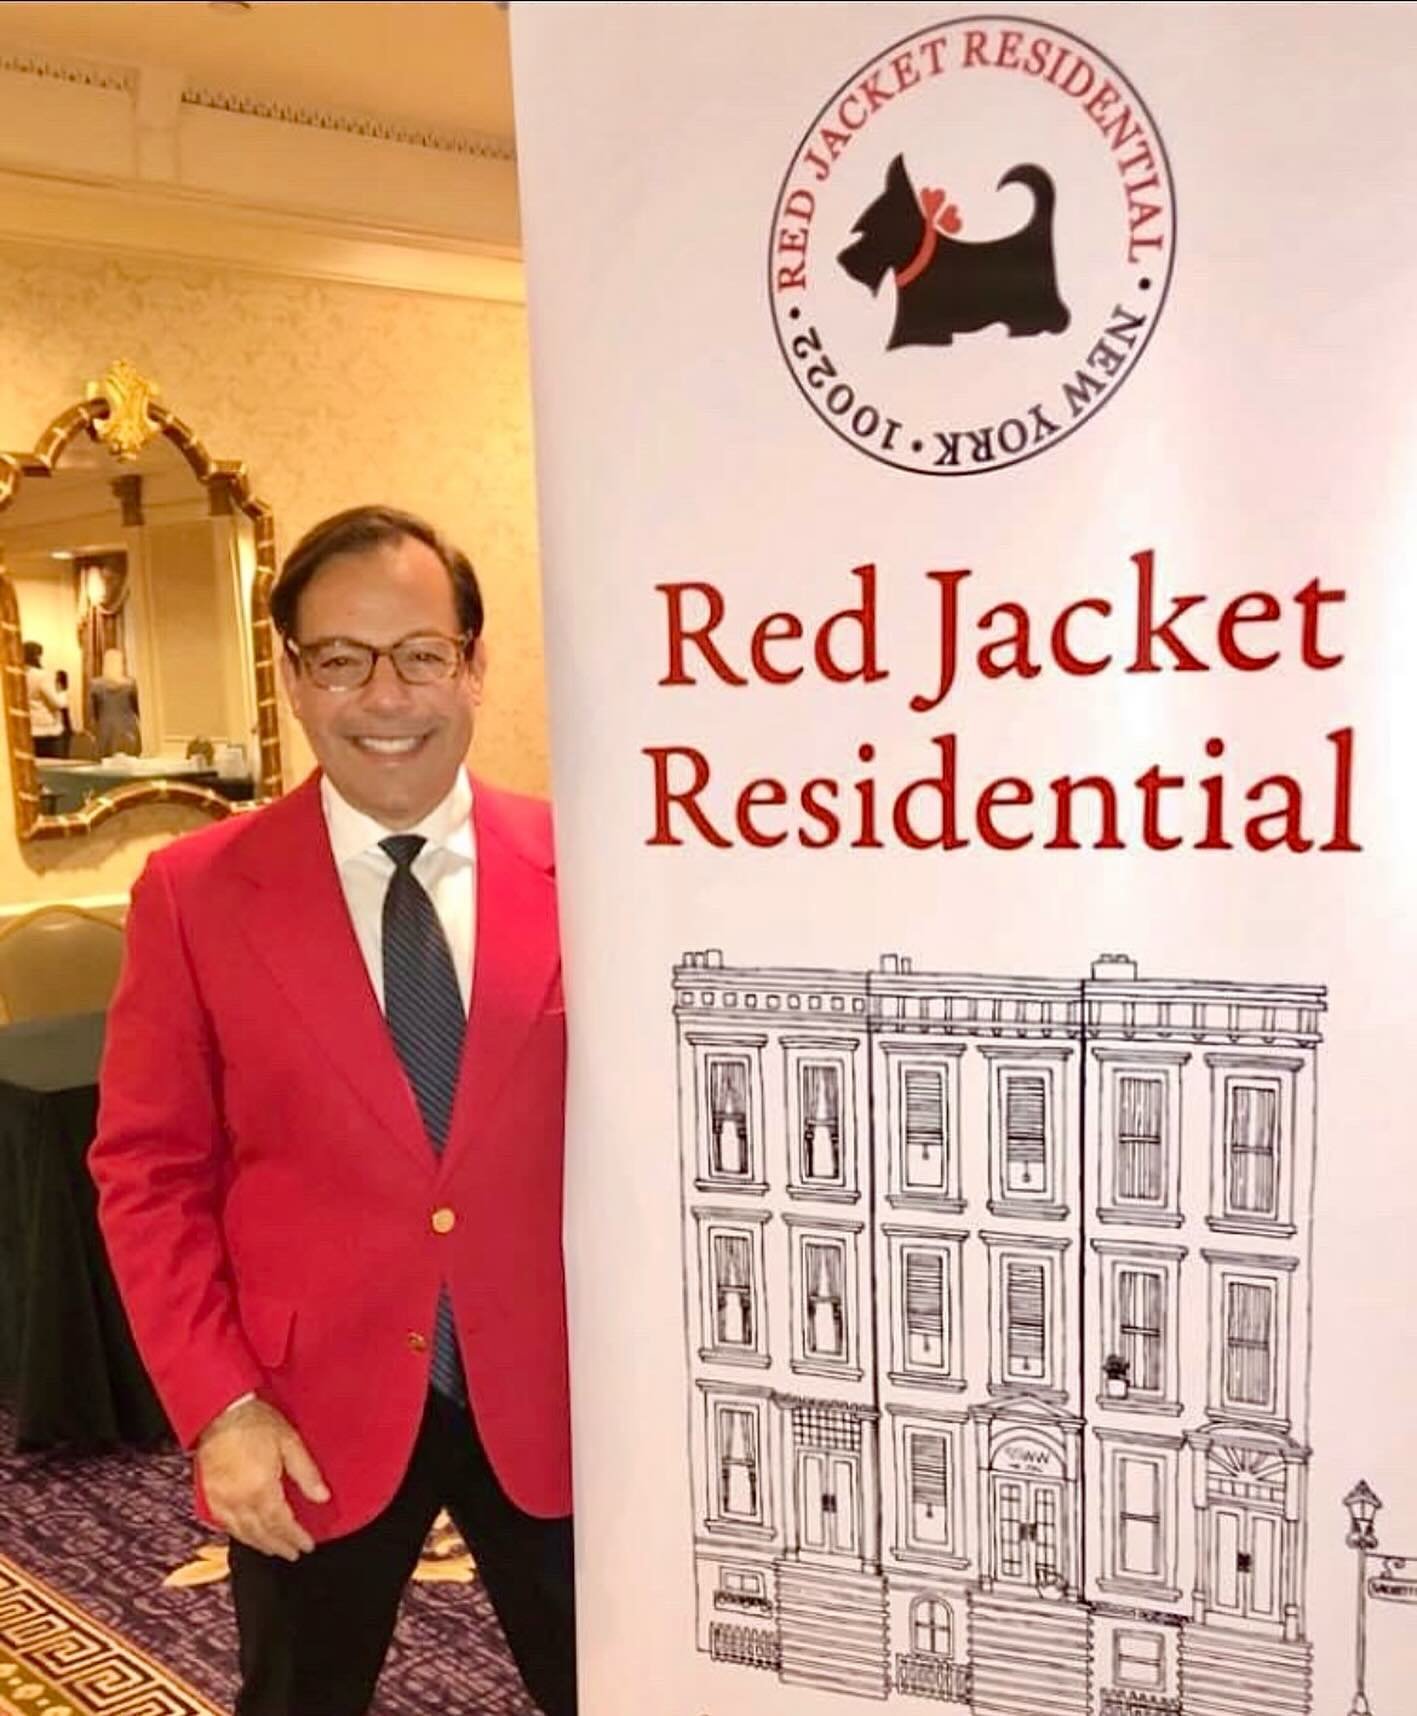 The Red Jacket Strikes Again!
Nothing like starting the day with an email confirming that your buyer client is board approved and will be a West Village resident in the near future. 
www.redjacketresidential.com
When Only The Best Will Do.

#leaveitt